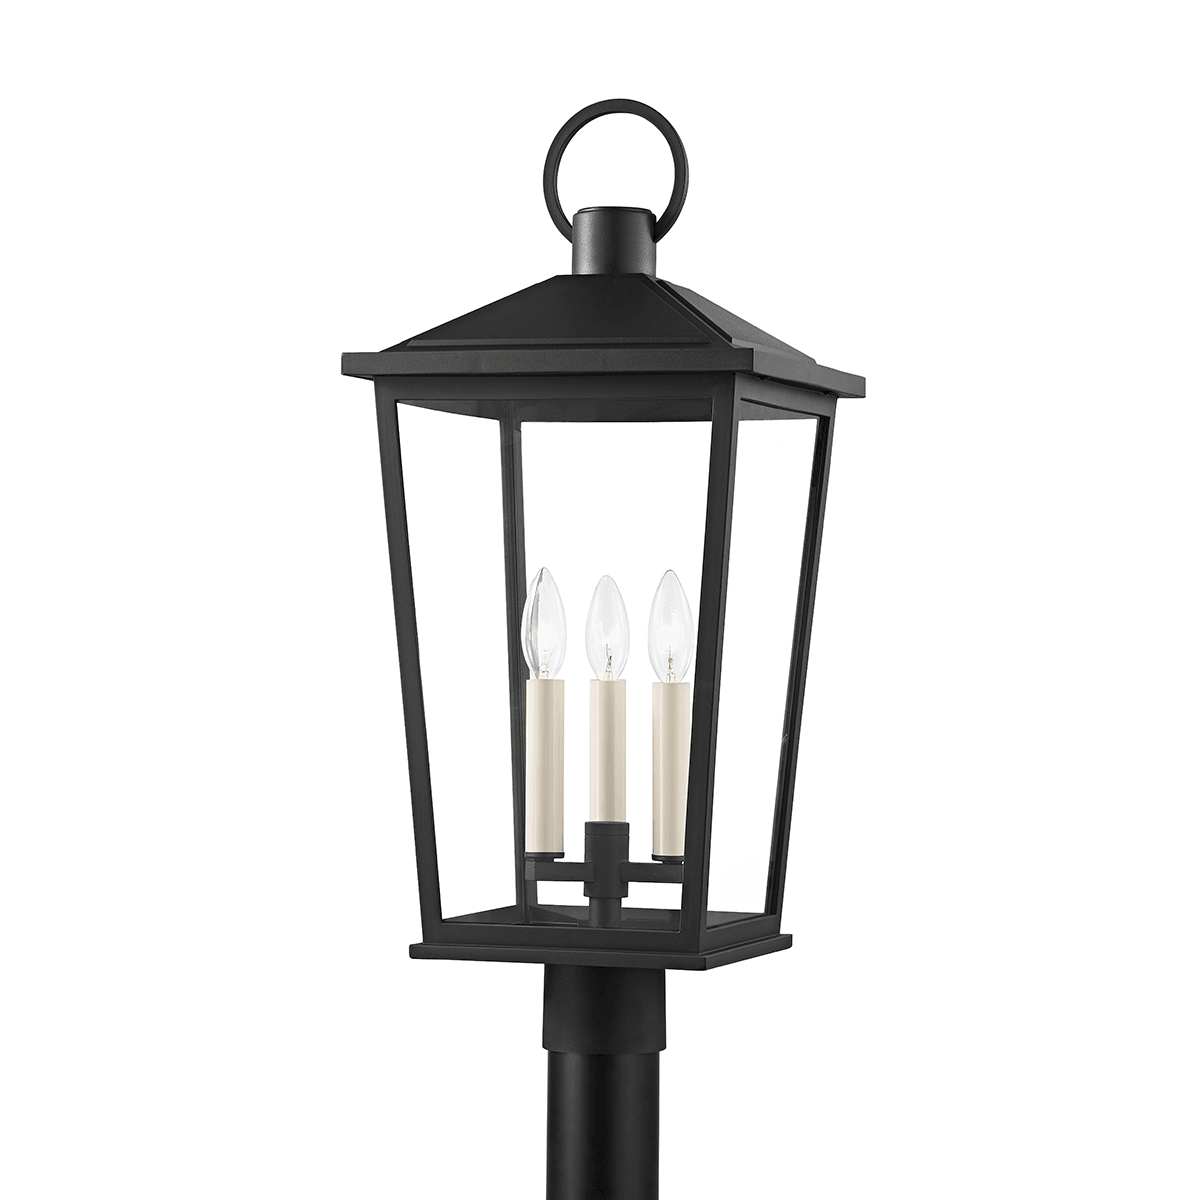 Aluminum Frame with Clear Glass Shade Outdoor Post Light - LV LIGHTING